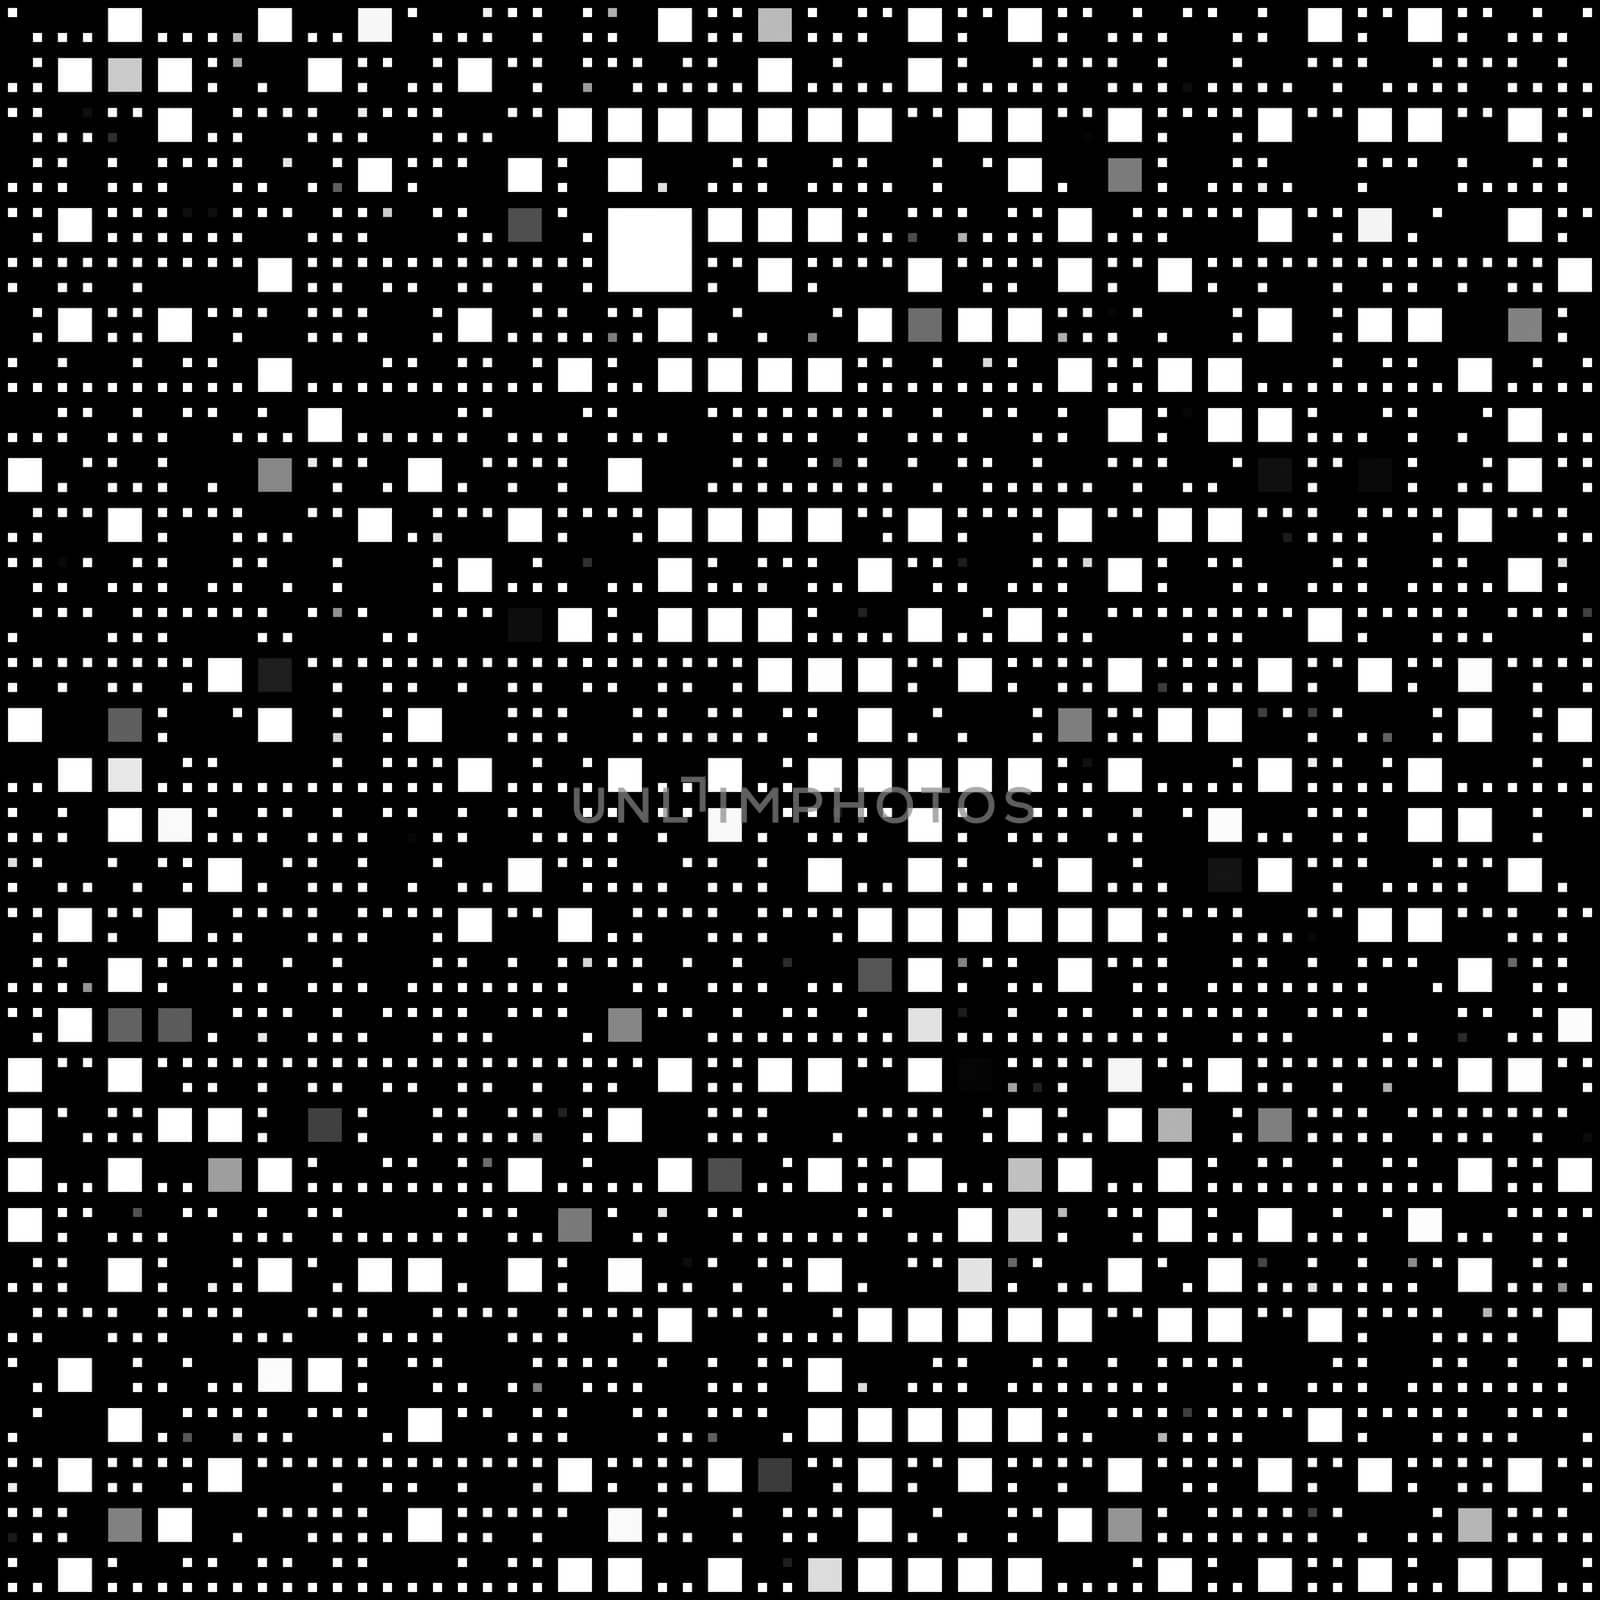 black and white block pattern by weknow